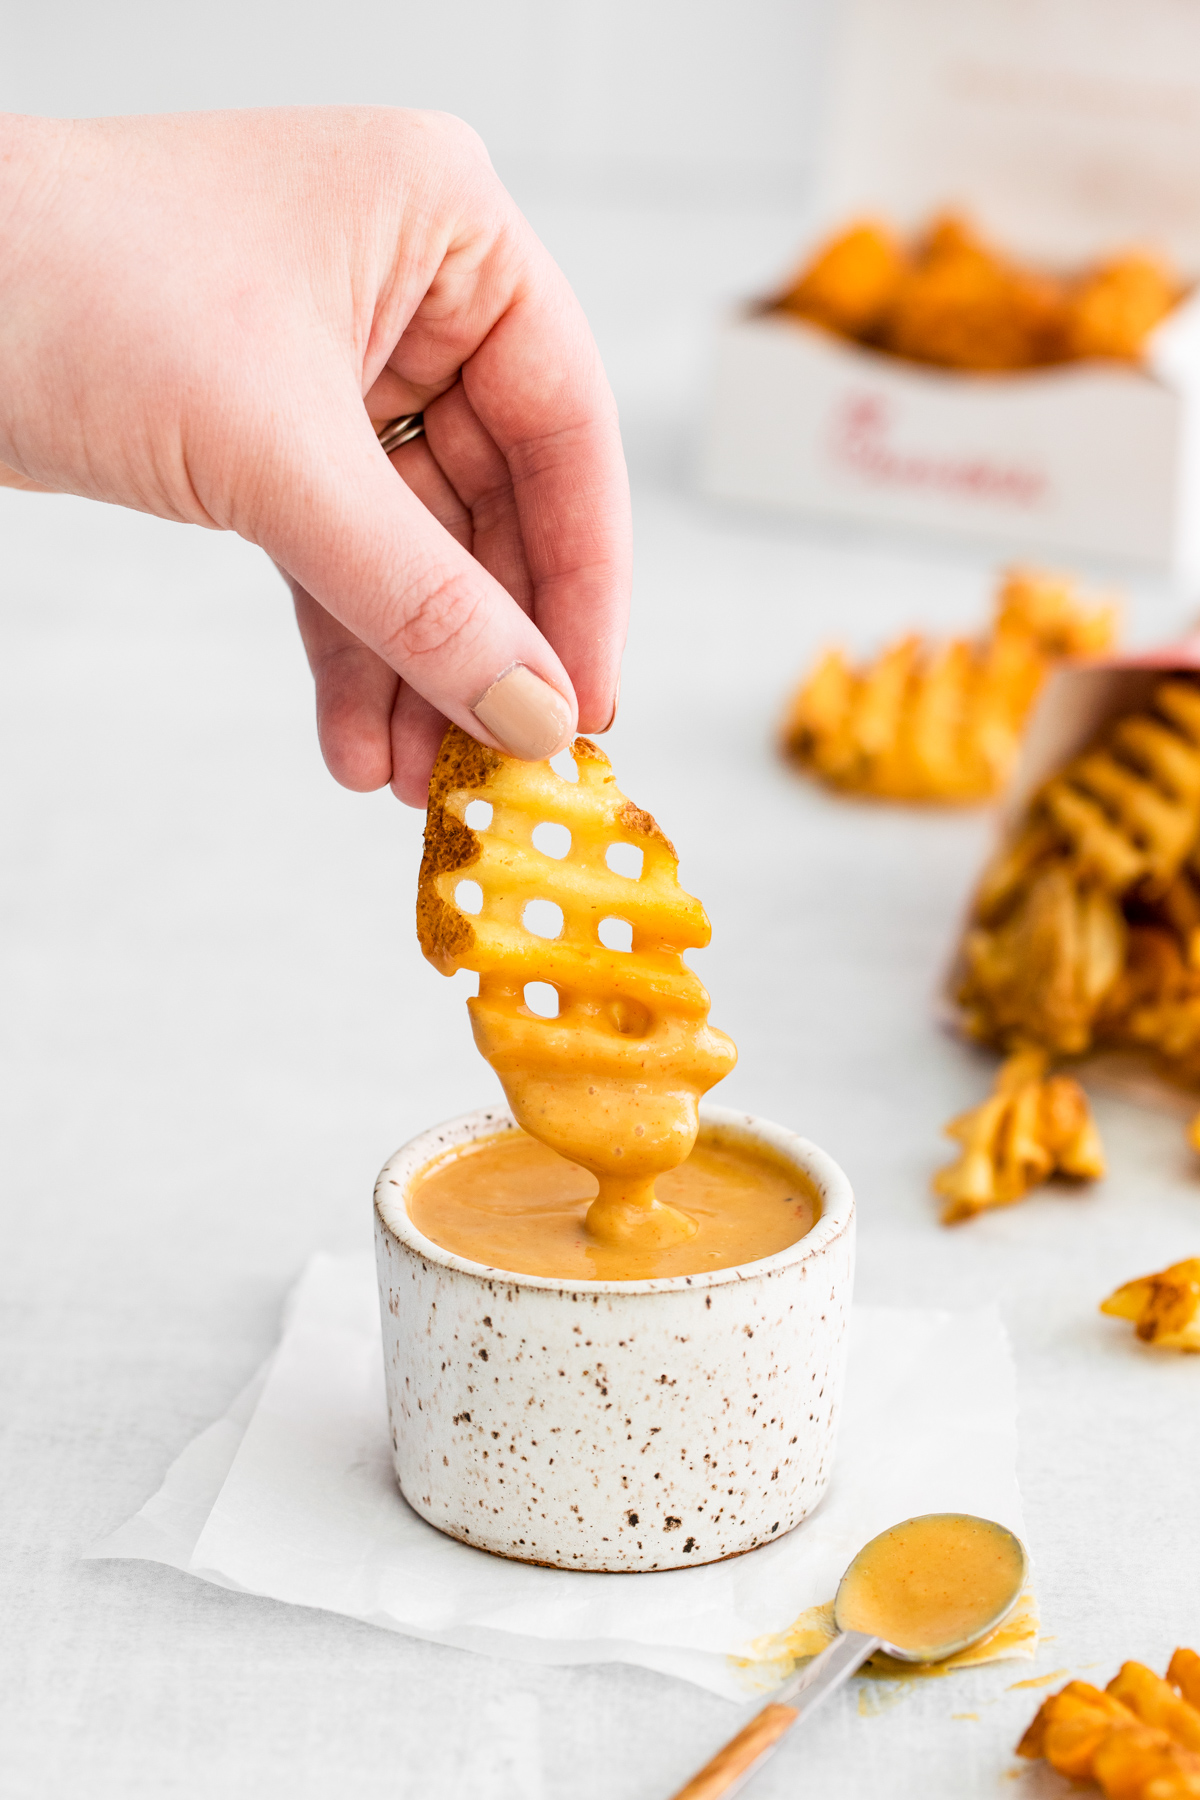 A fry being dipped into Copycat Chick-fil-A Sauce.